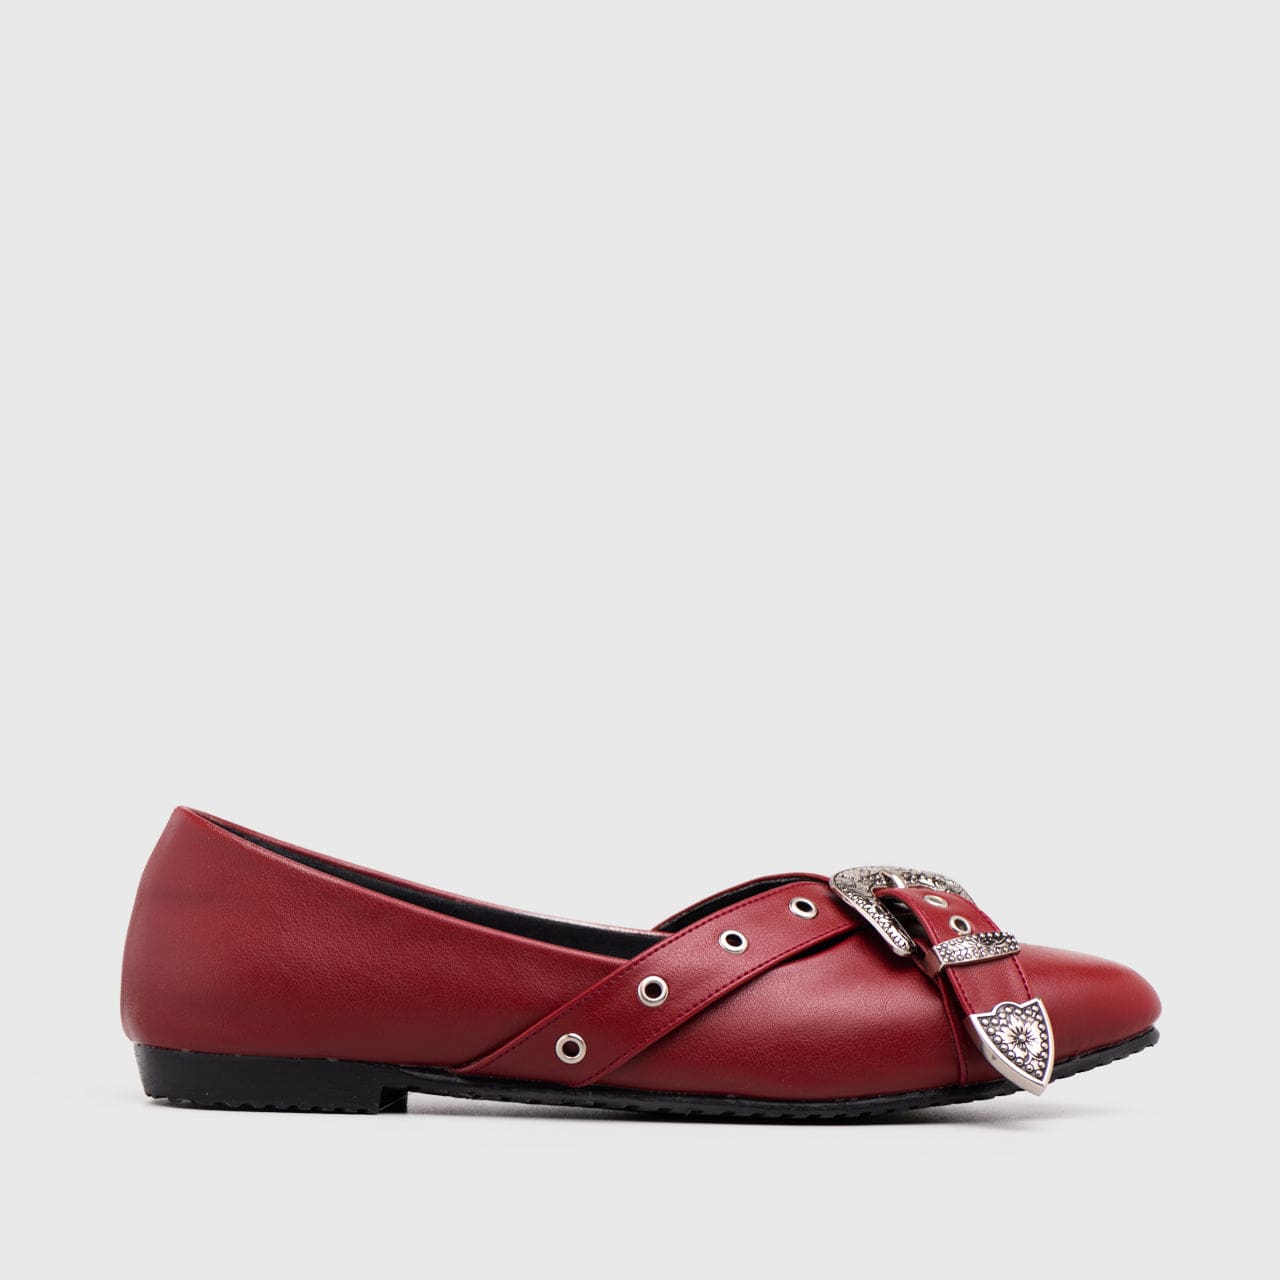 Adorable Projects Official Adorableprojects - Mufla Flat Shoes Maroon - Sepatu Flat